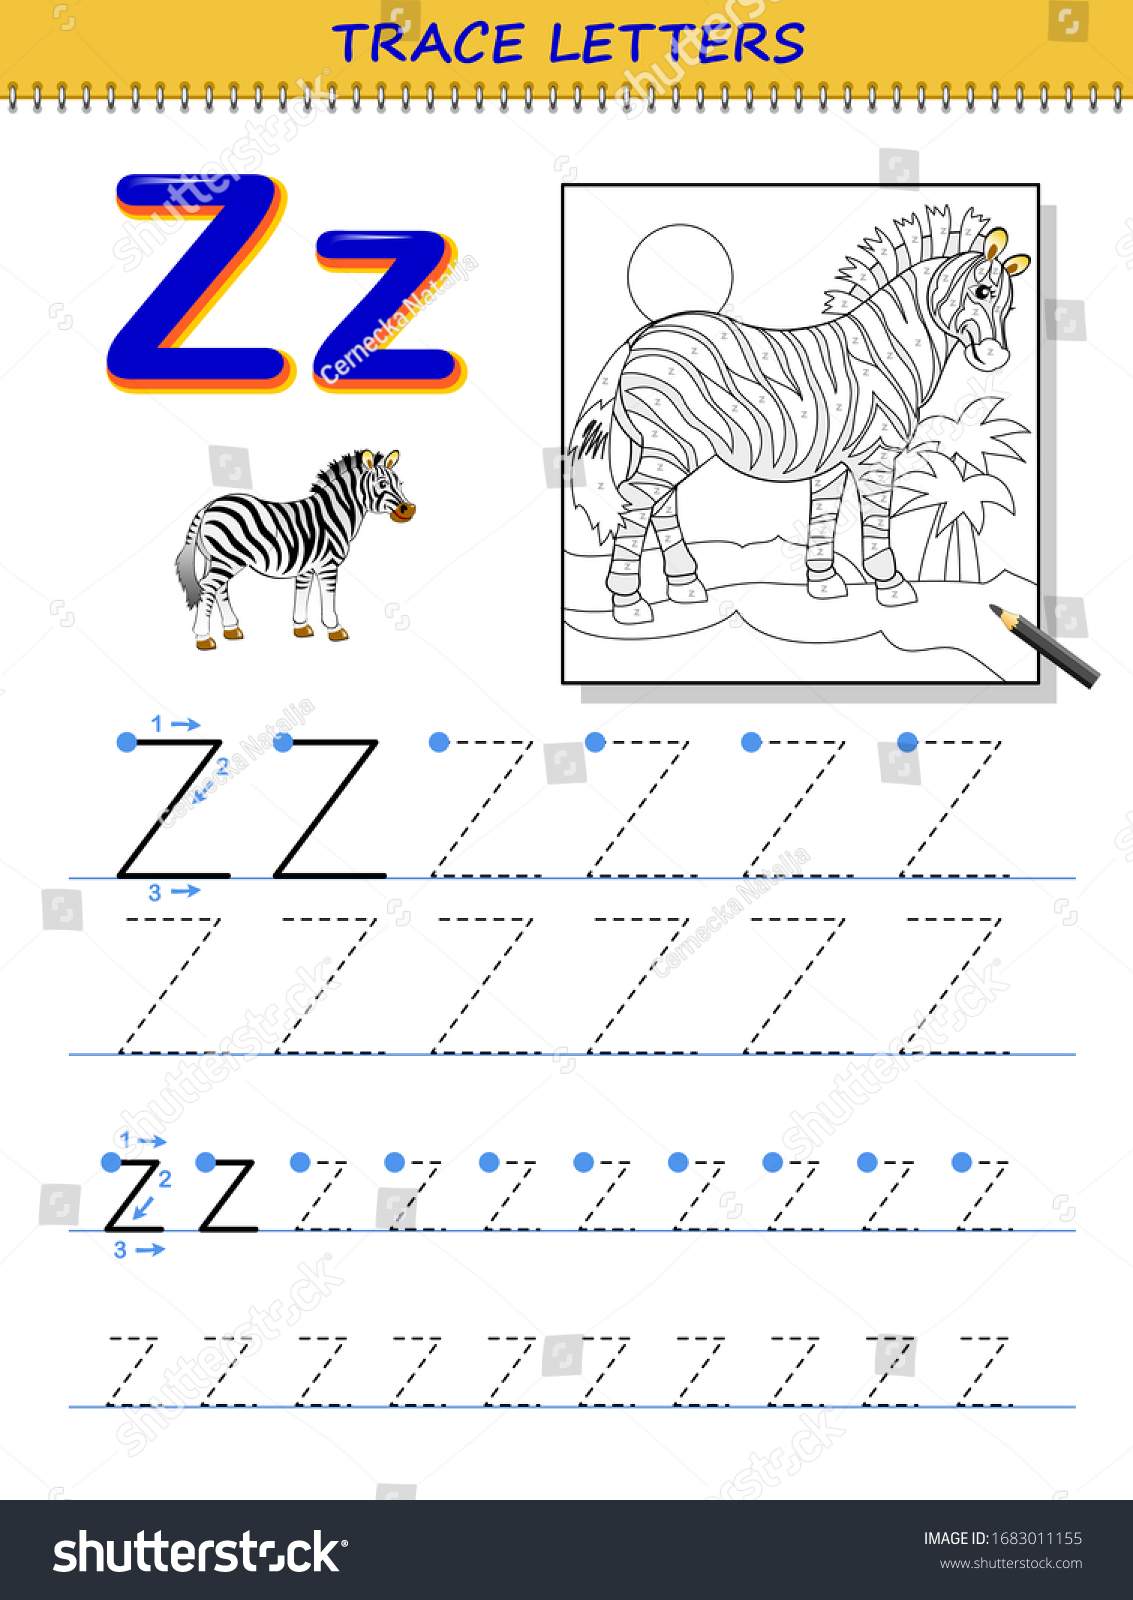 tracing letter z study alphabet printable stock vector royalty free 1683011155 shutterstock